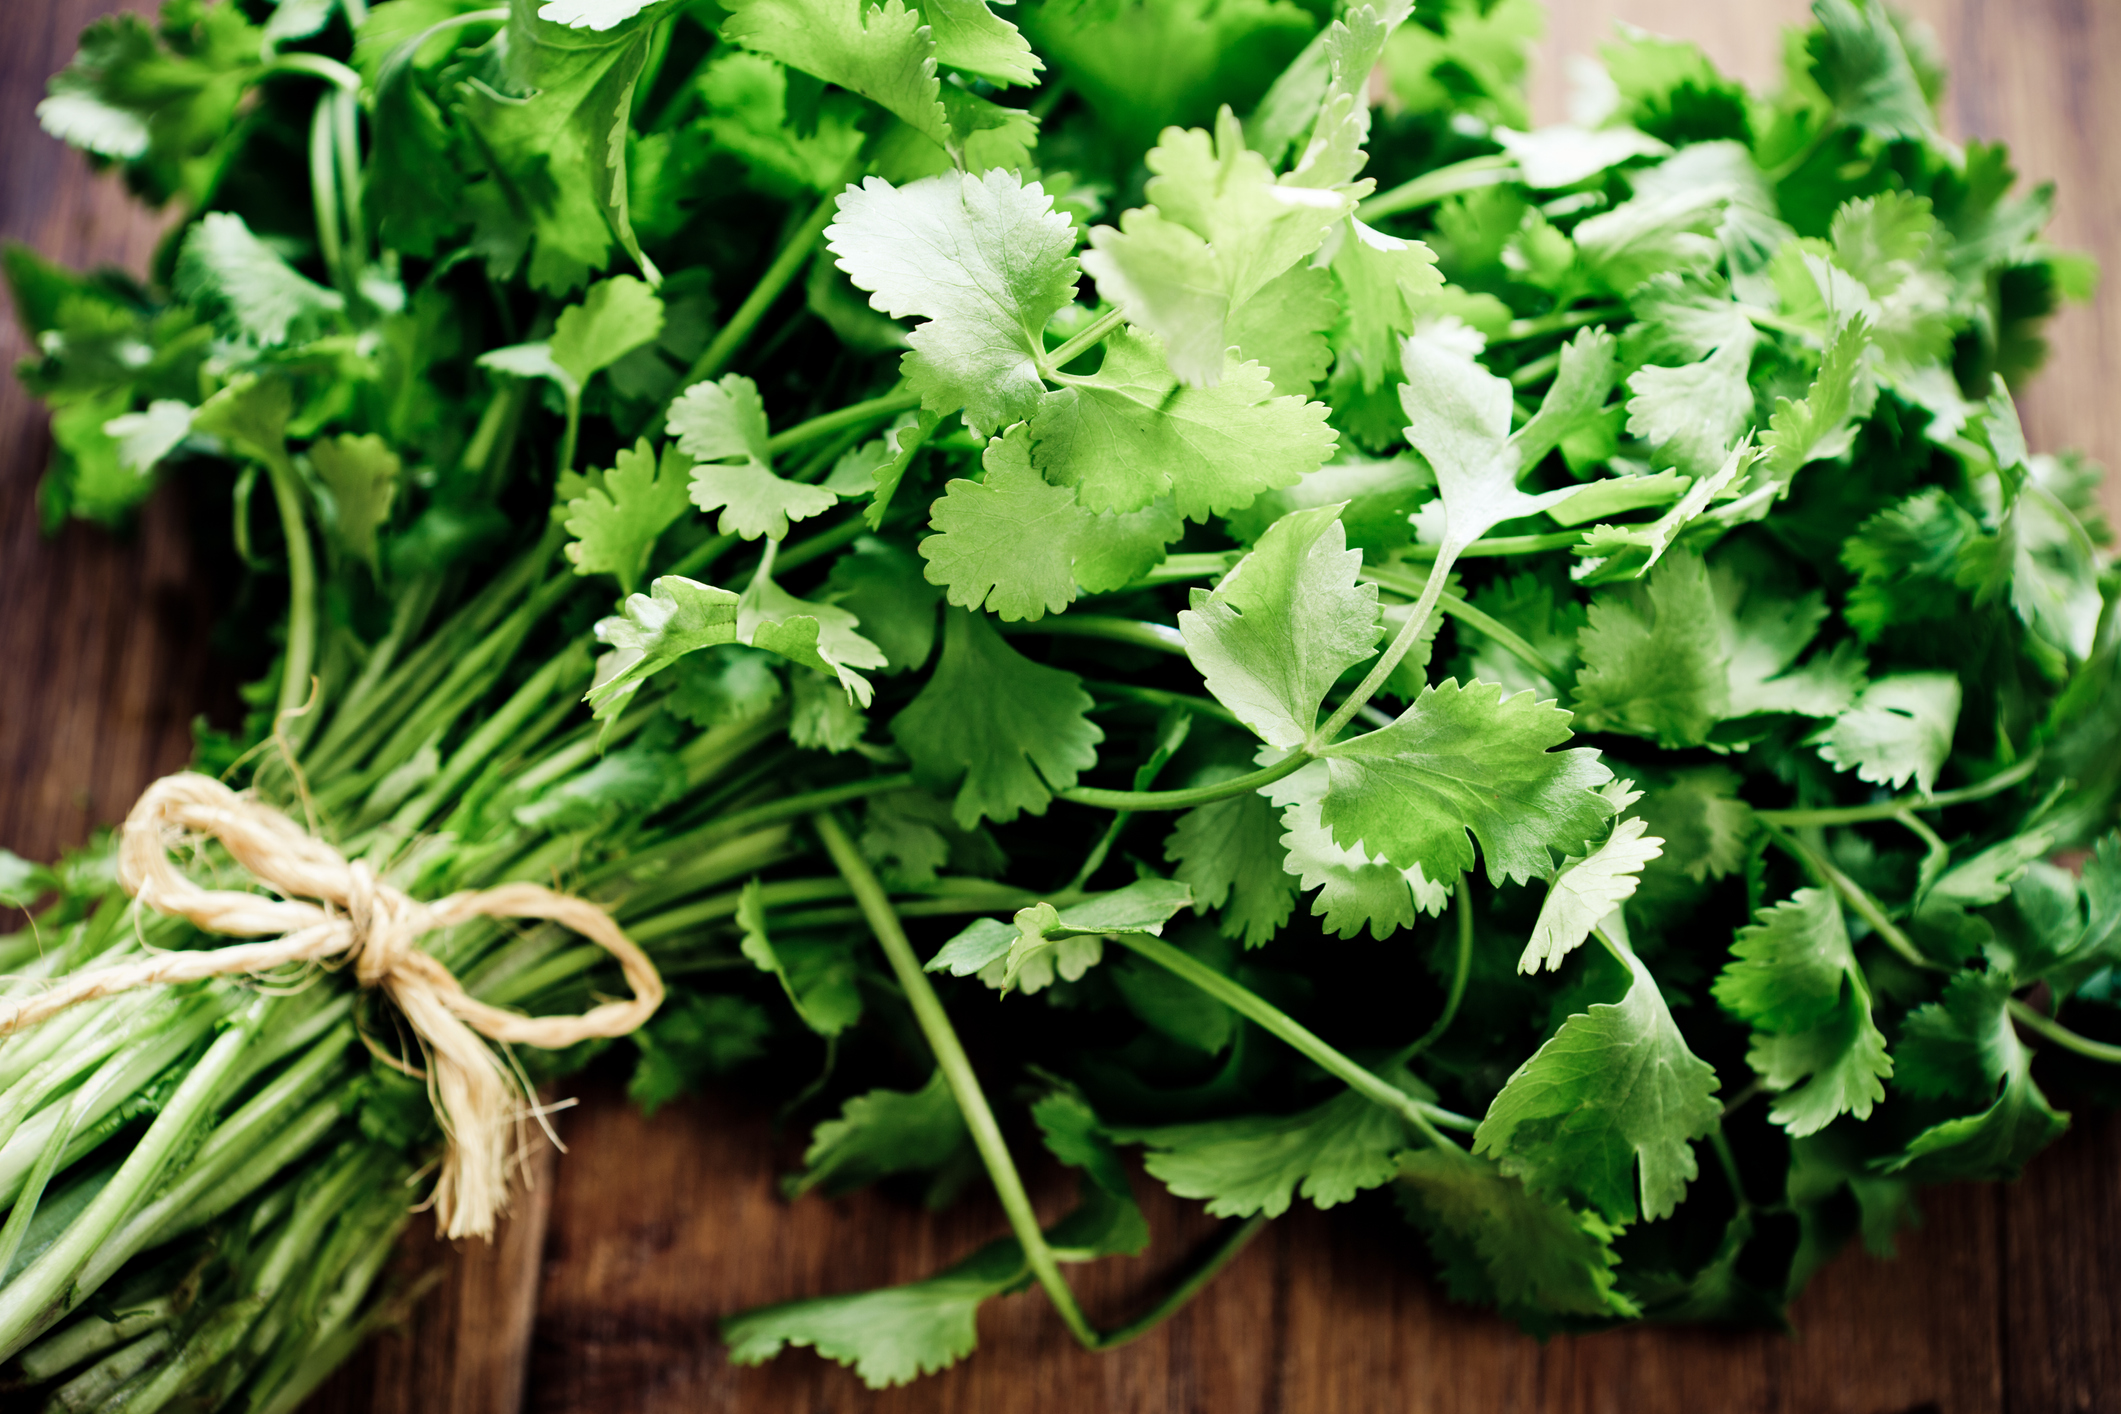  How to grow the super-divisive cilantro plant to brighten up your meals